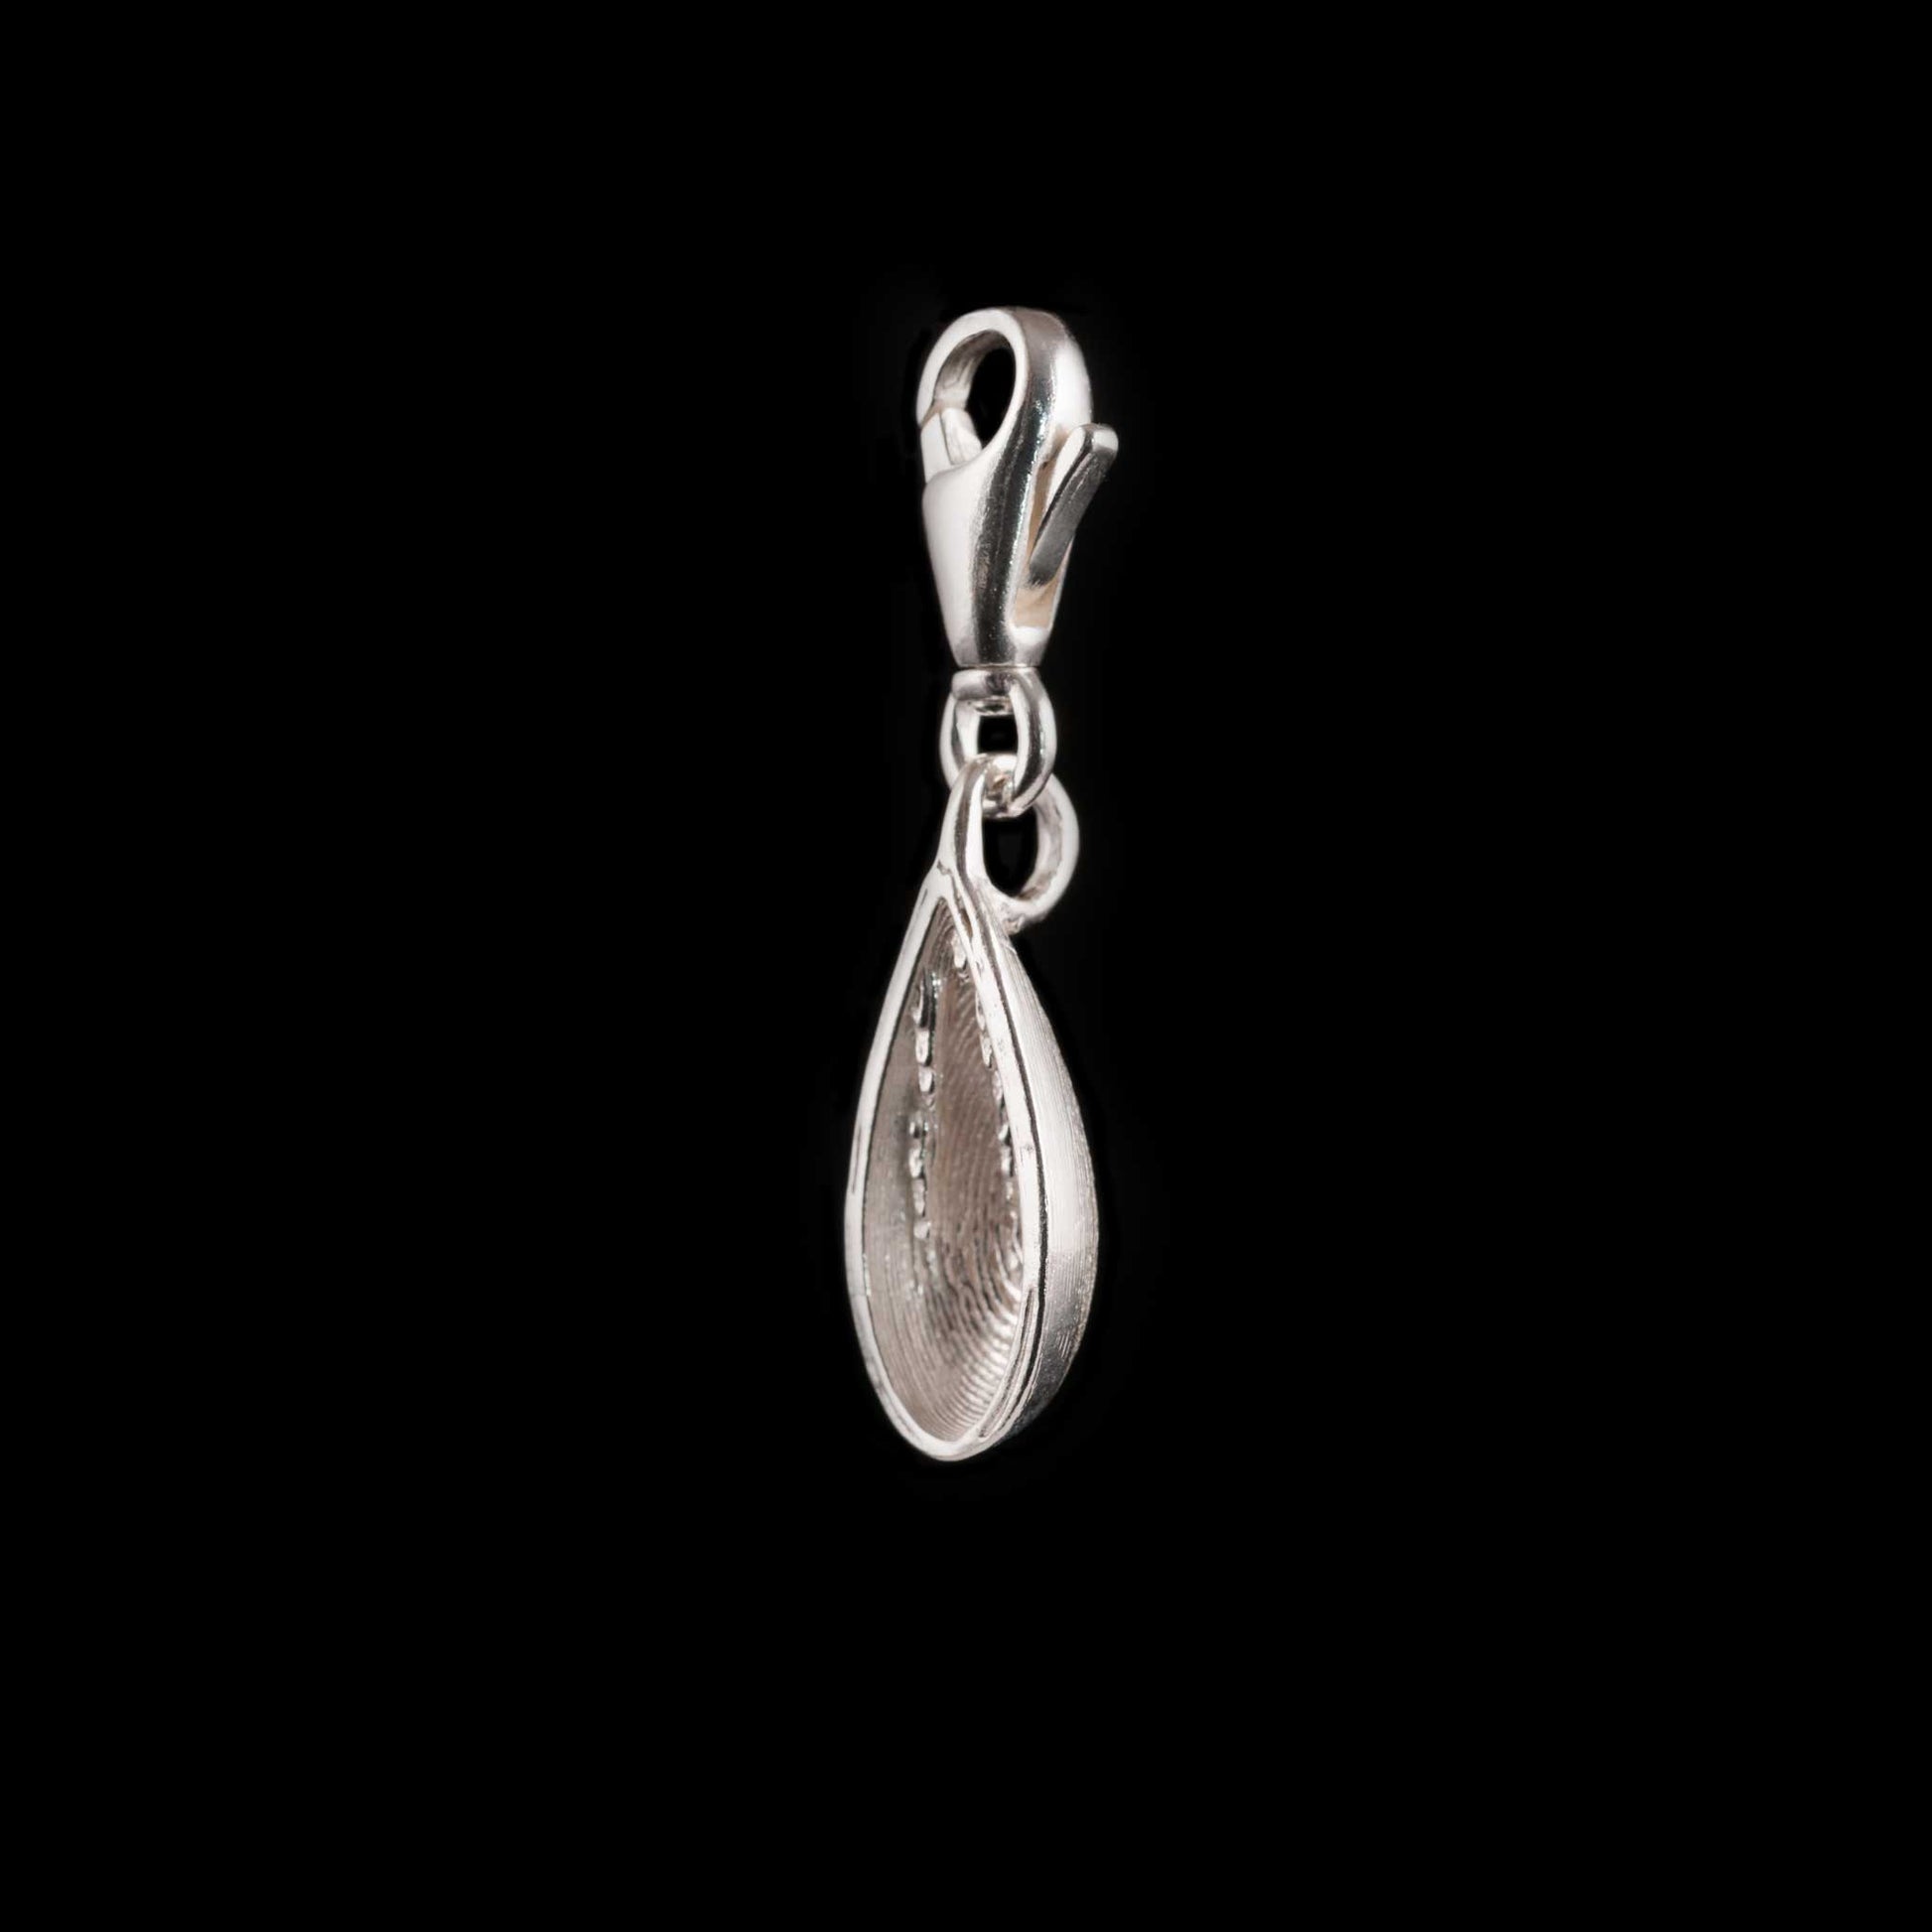 Marble Arch Caves Silver Charm made from Sterling Silver and can be made to fit most European Charm Bracelets.